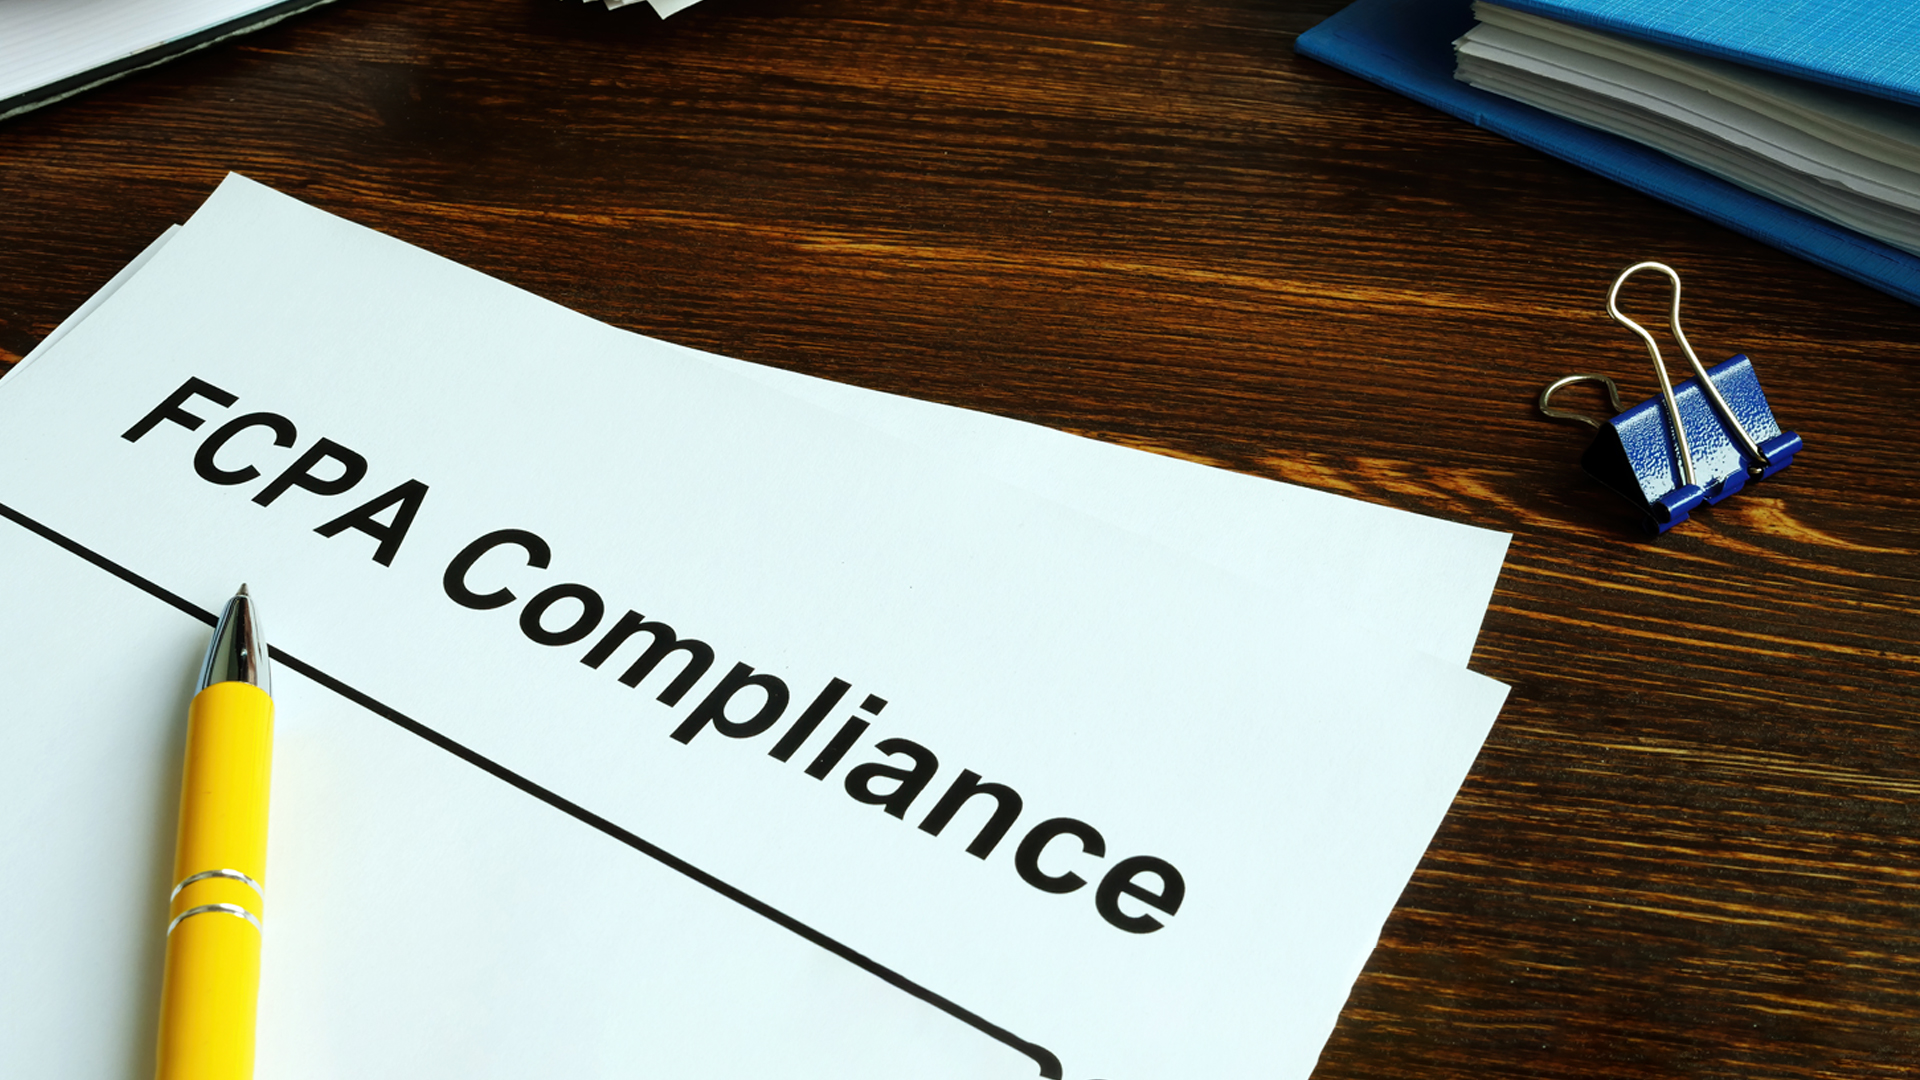 The US Foreign Corrupt Practices Act. FCPA Compliance Guide on the desk image